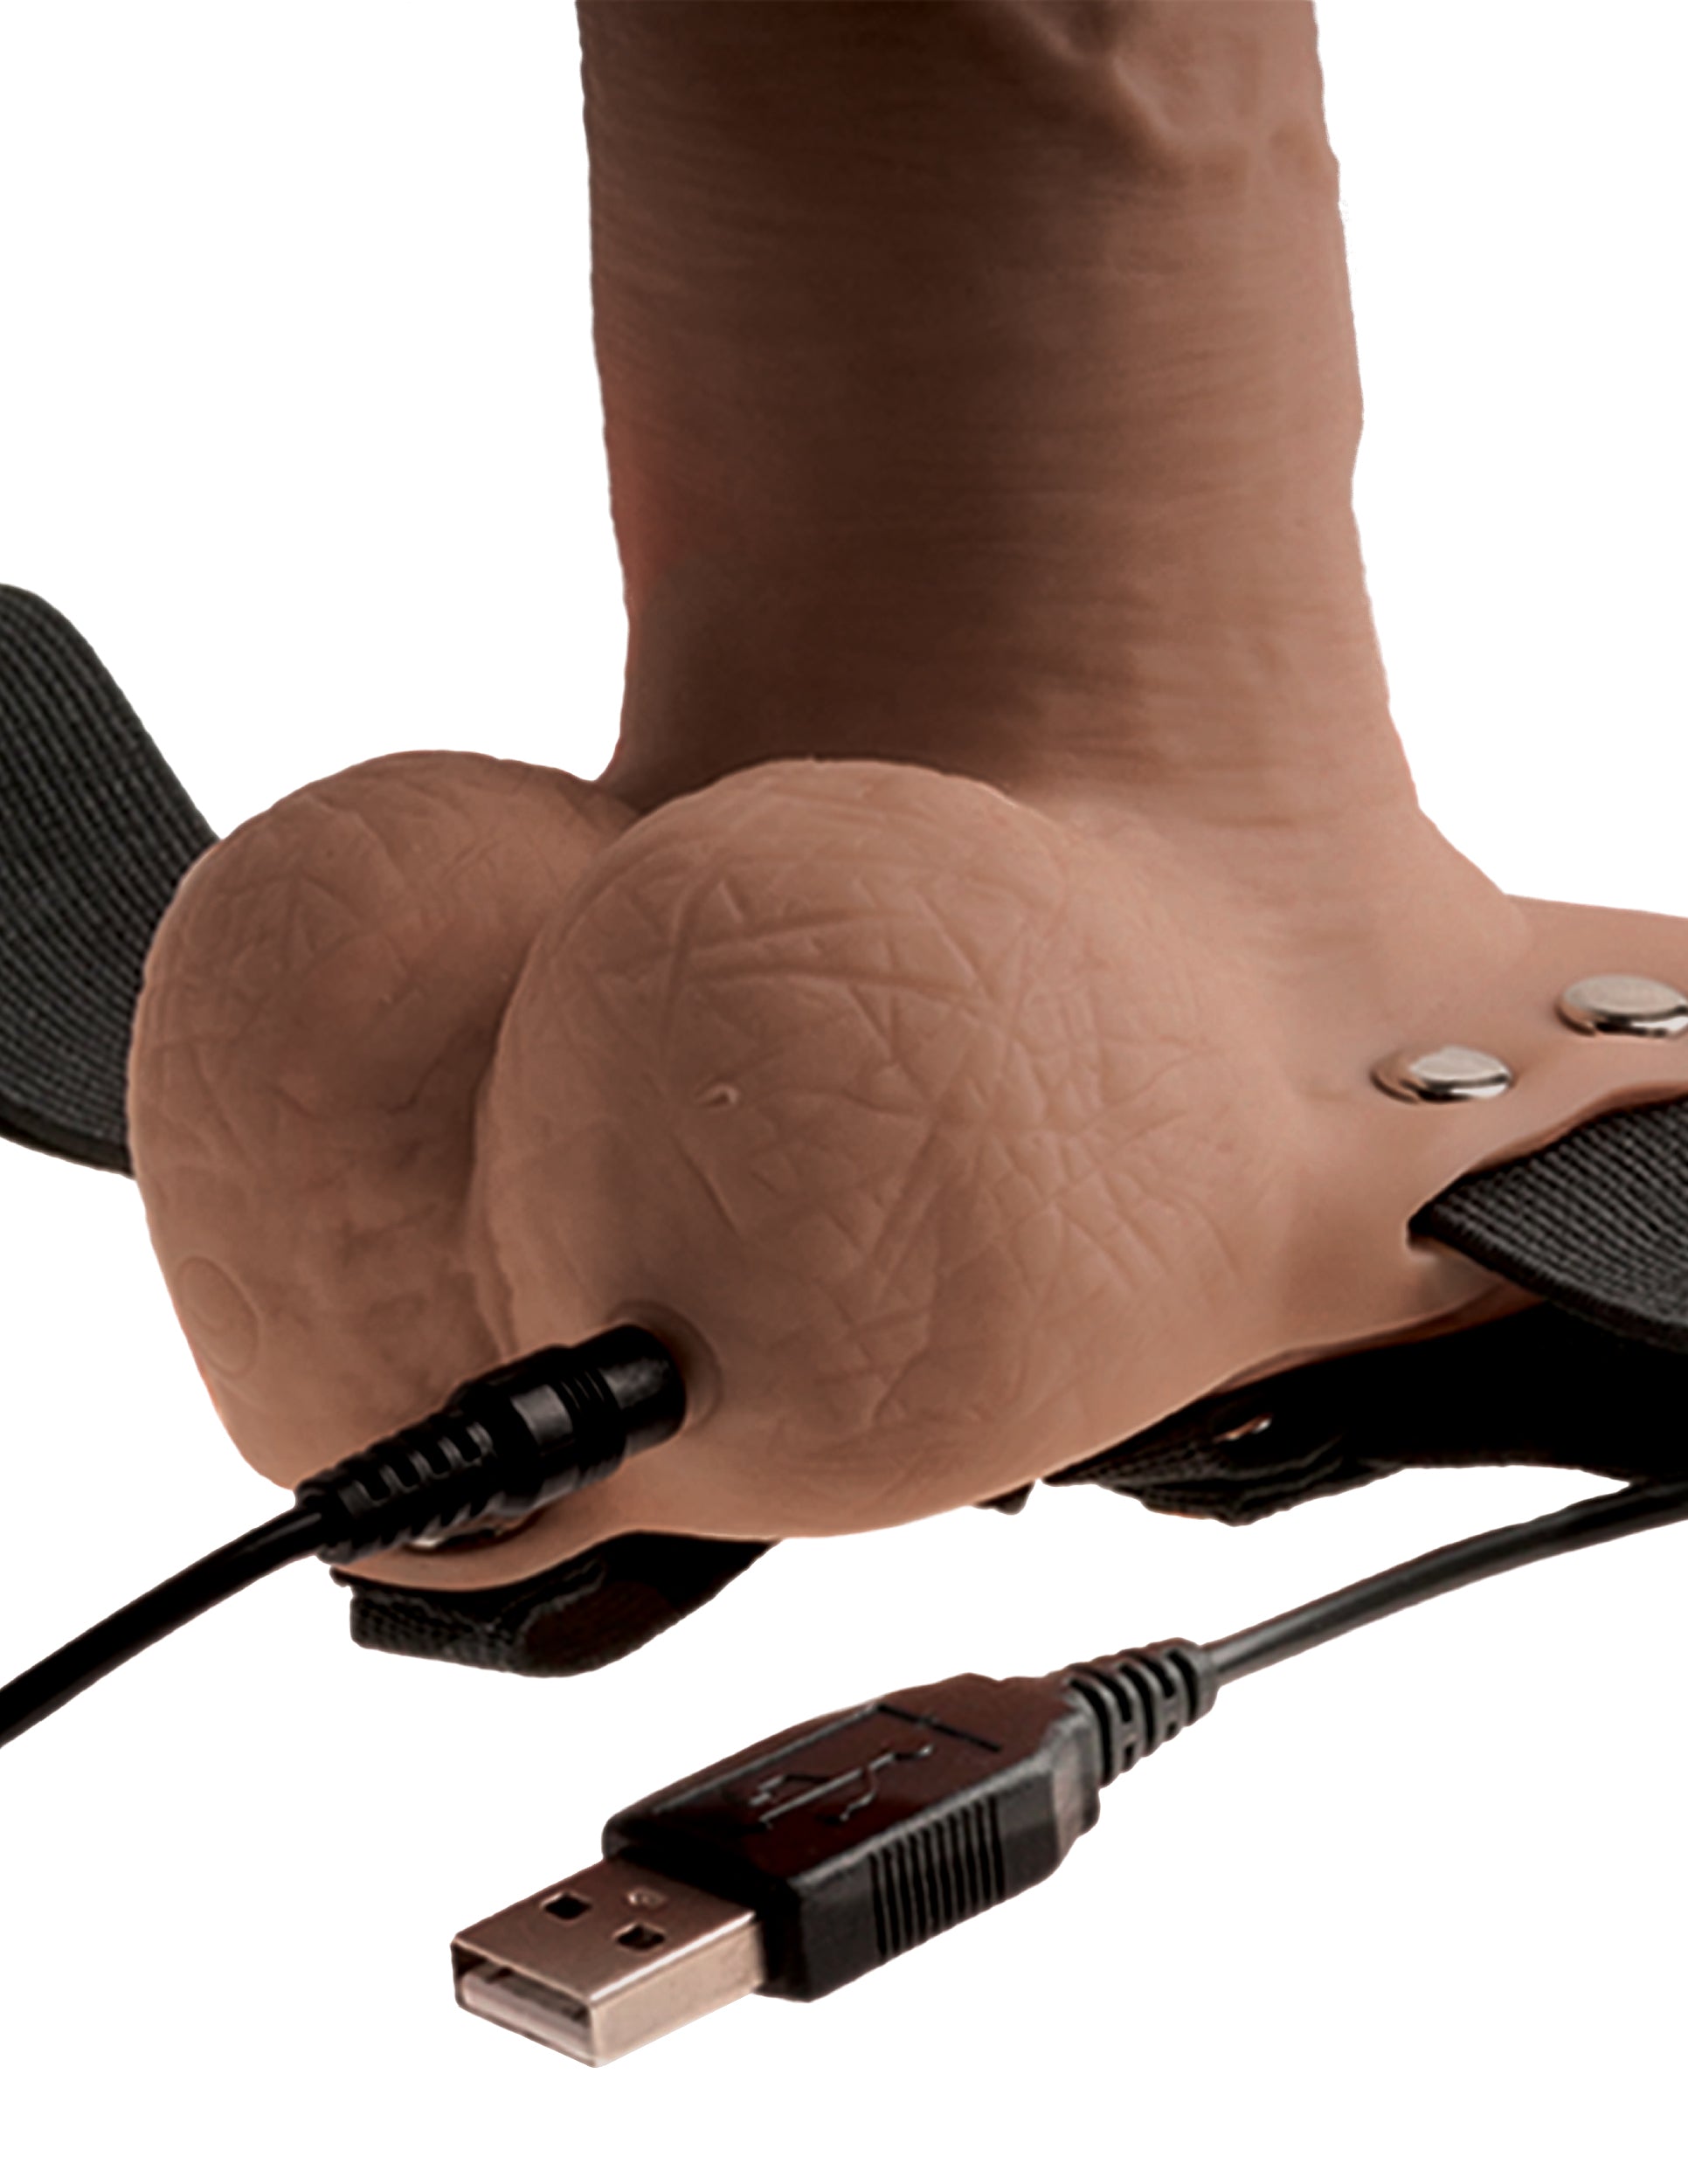 Fetish Fantasy 6 In Hollow Rechargeable Strap-on Tan